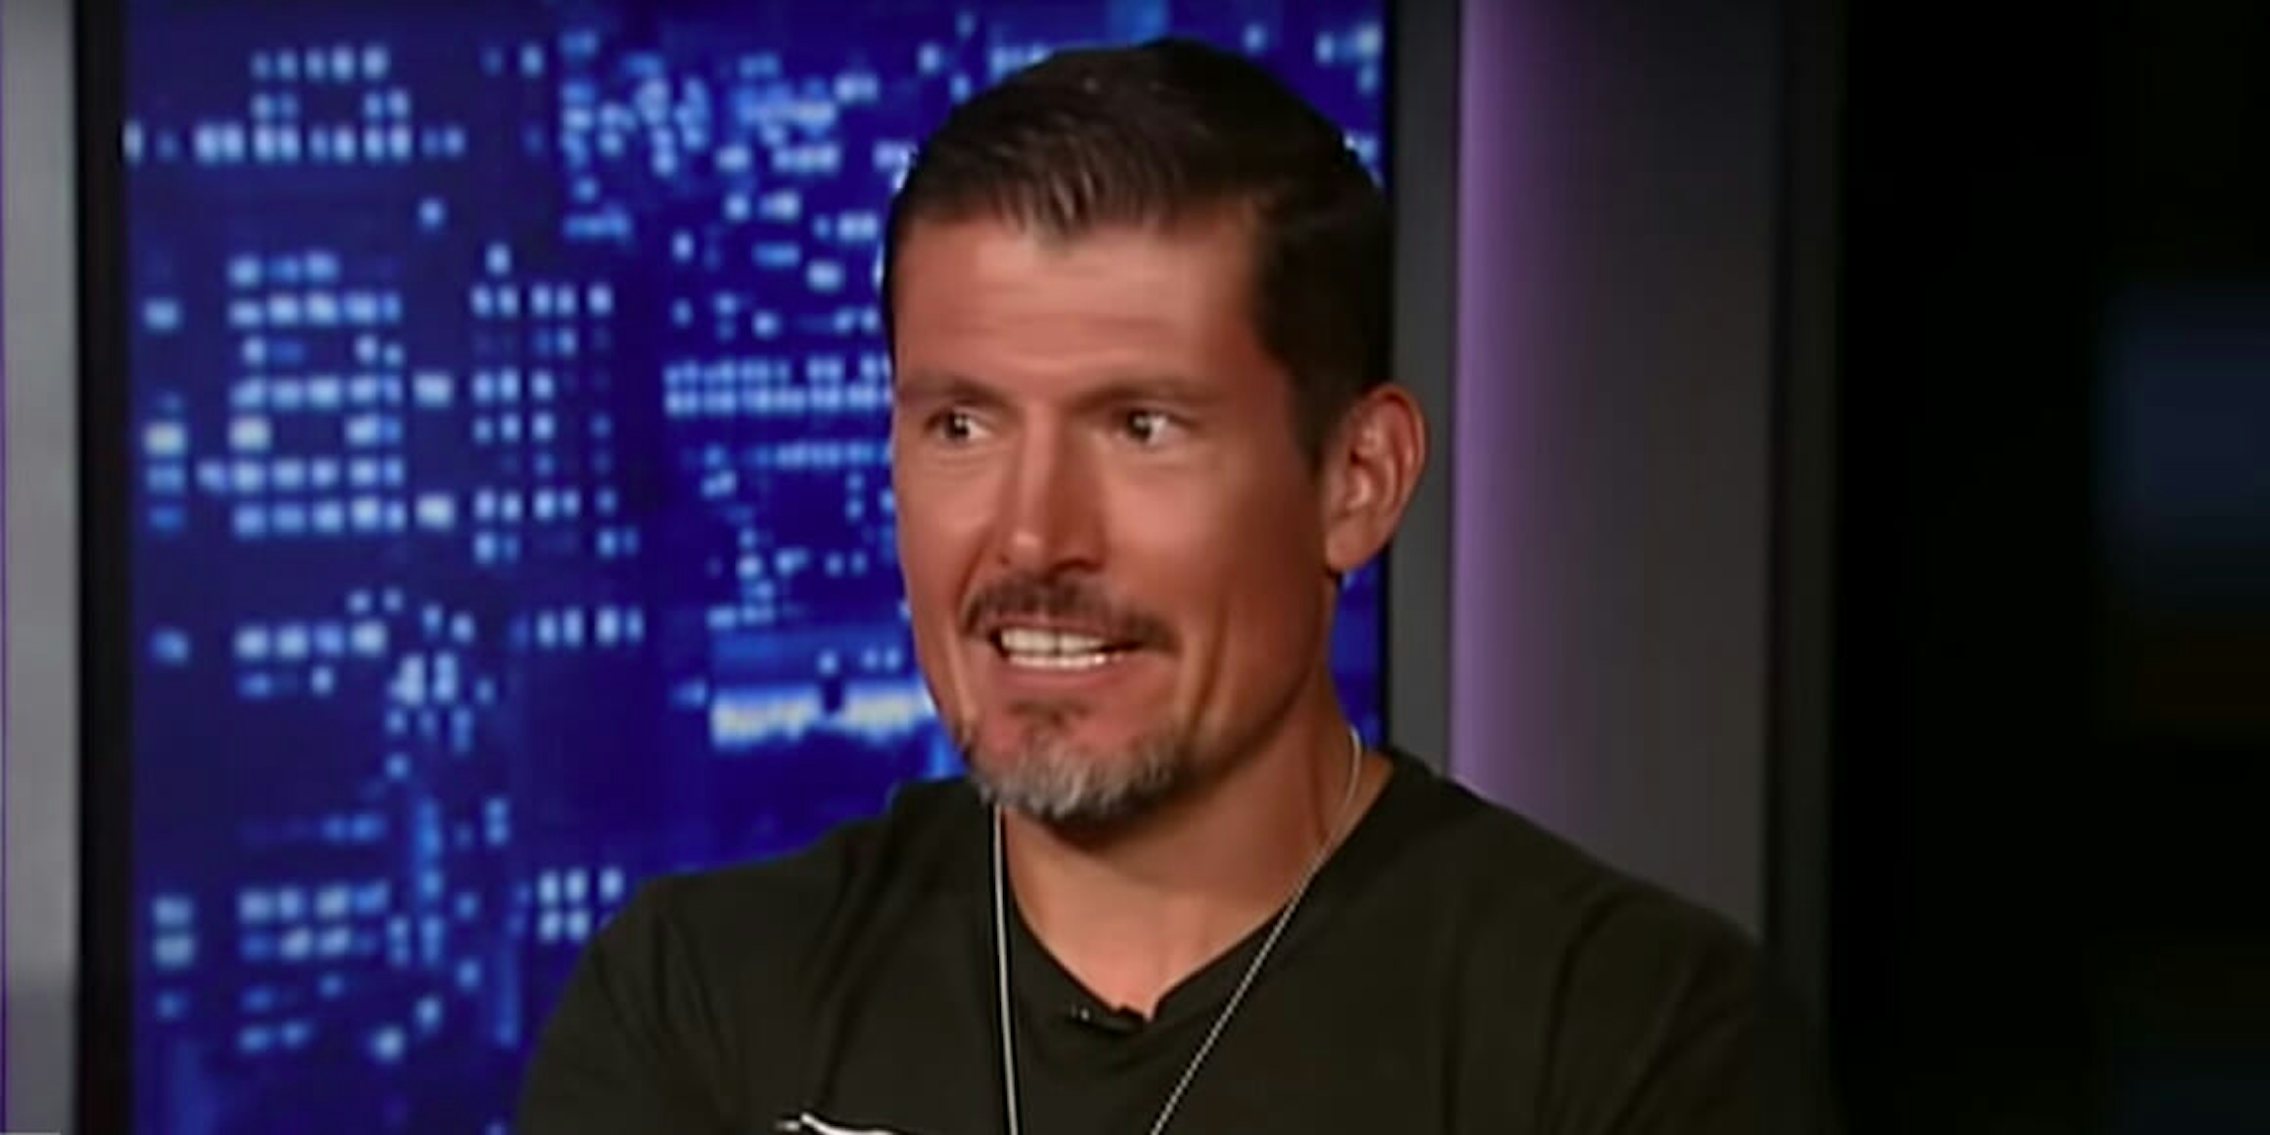 Kris Paronto gets suspended from Twitter for hate speech against liberals and former president Obama.